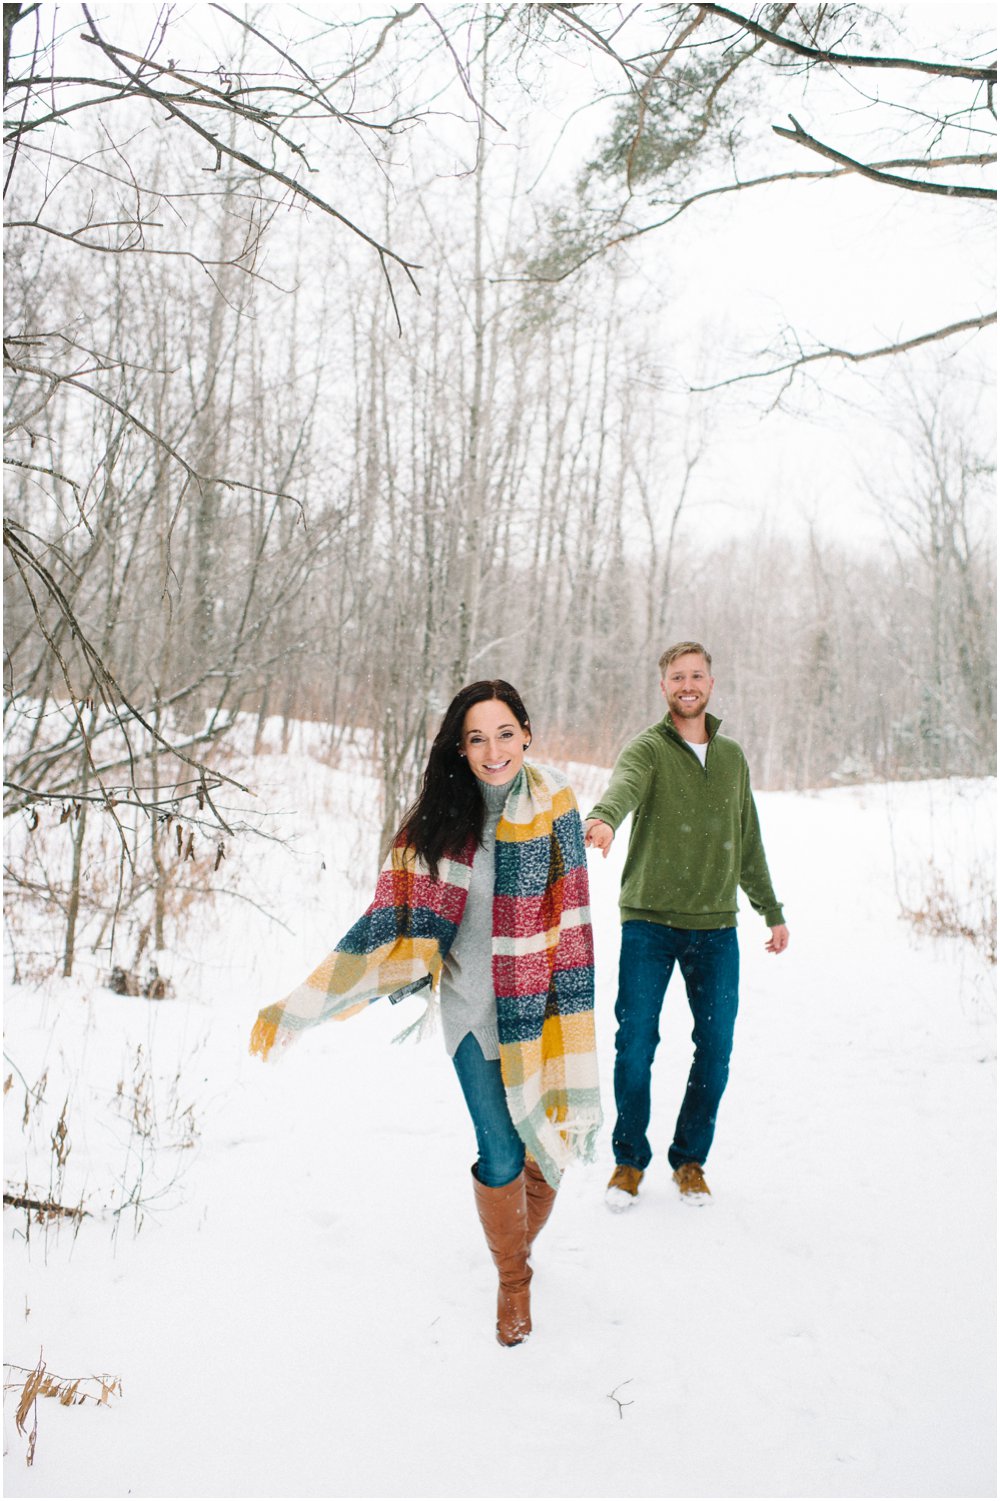 Duluth, Minnesota Snowy Winter Engagement Session